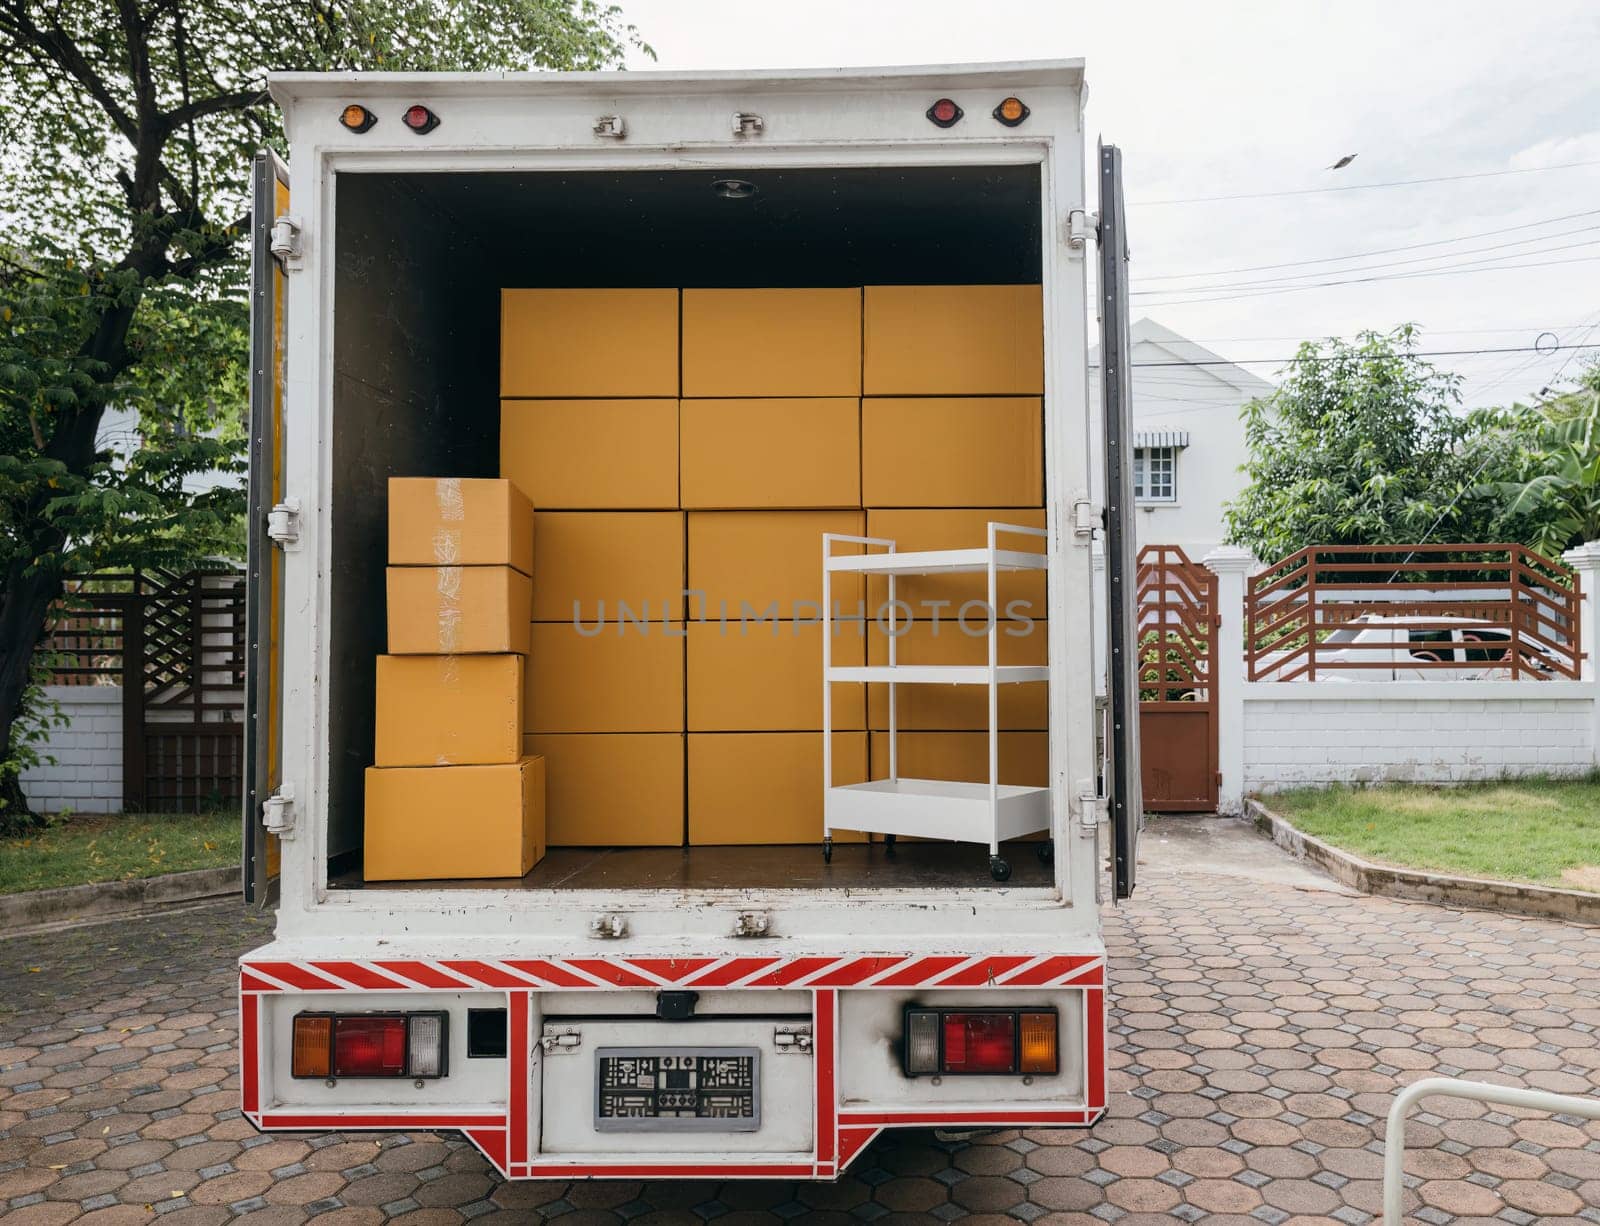 Moving day, White delivery van and open car trunk with cardboard boxes outdoors. Logistic service for house relocation. Transporting items. Moving Day Concept. by Sorapop